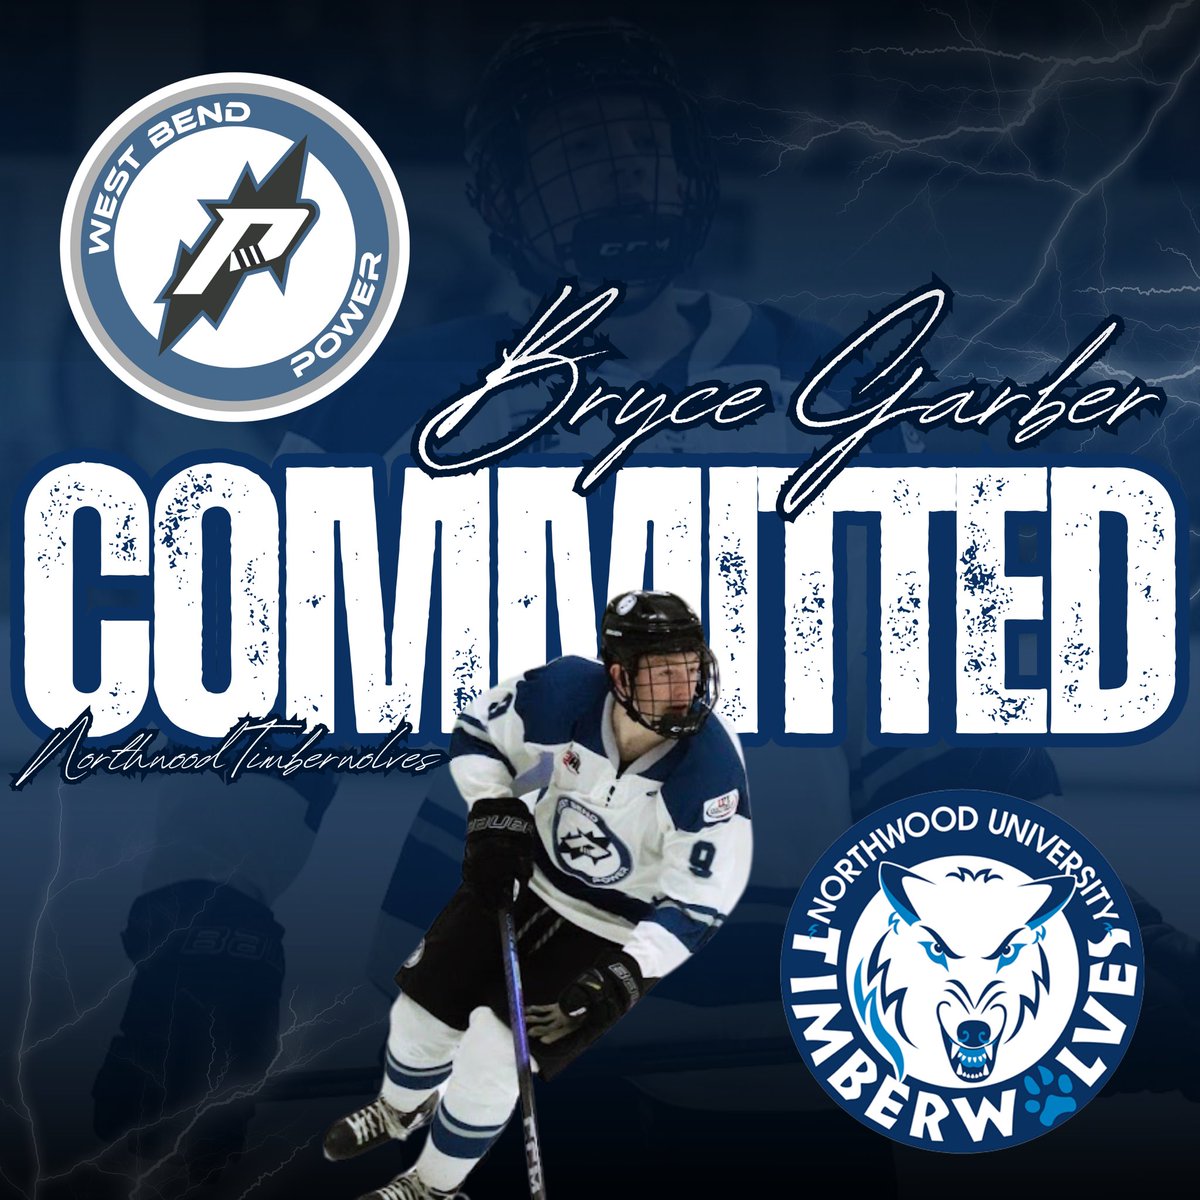 Congratulations to forward, Bryce Garber, on his college commitment to play ACHA Division 1 hockey at Northwood University! 👏

Way to go, Bryce! We wish you all the best in your next chapter🤩
@NorthwoodHckey @NA3HL @ACHAHockey 
#PowerUp